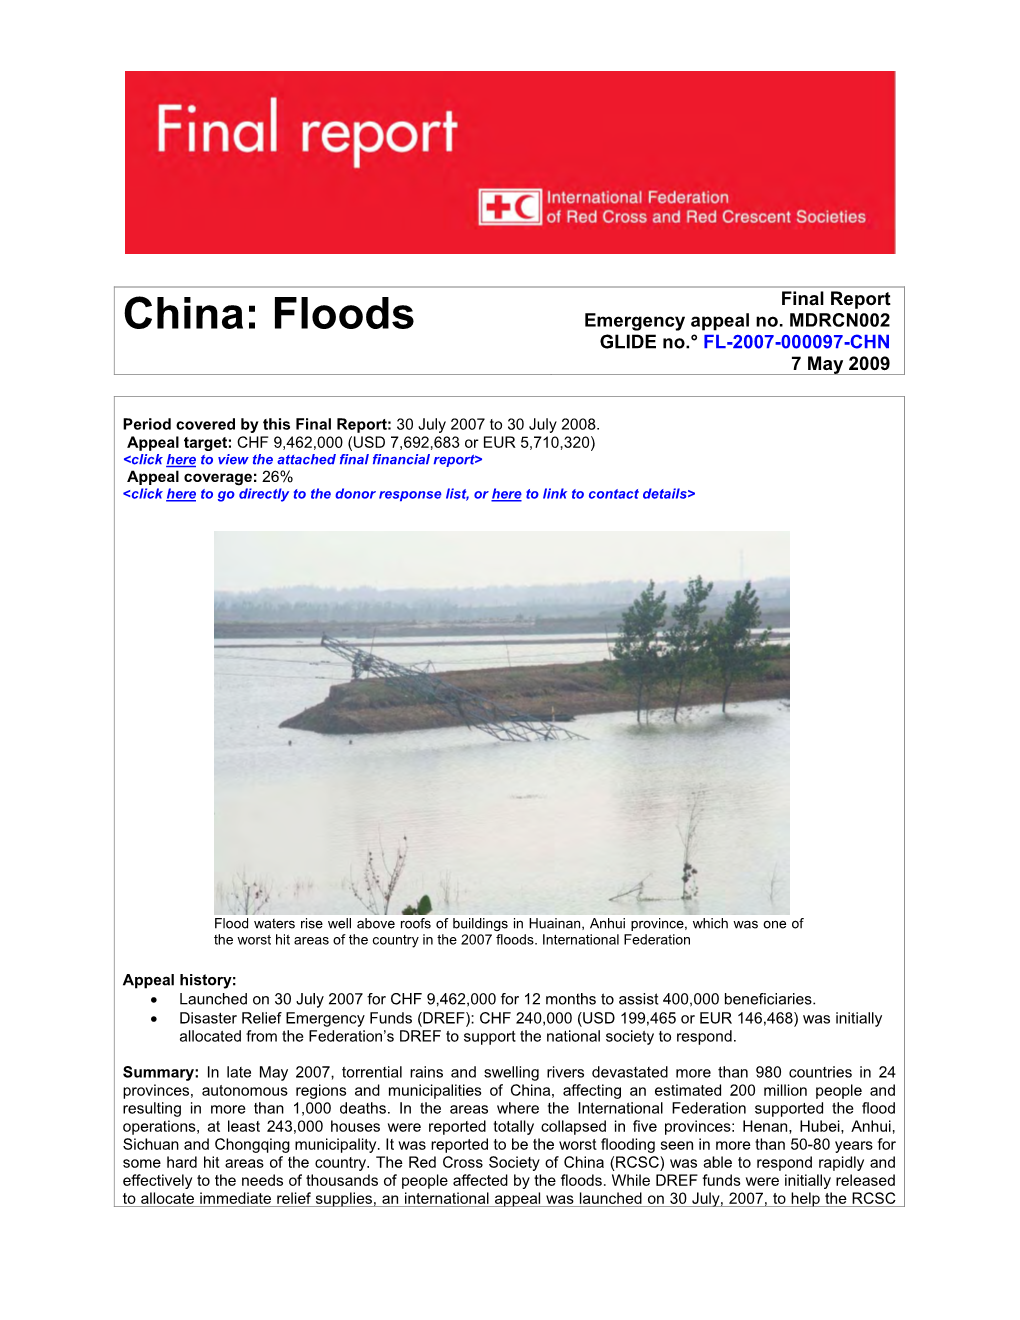 China: Floods Emergency Appeal No